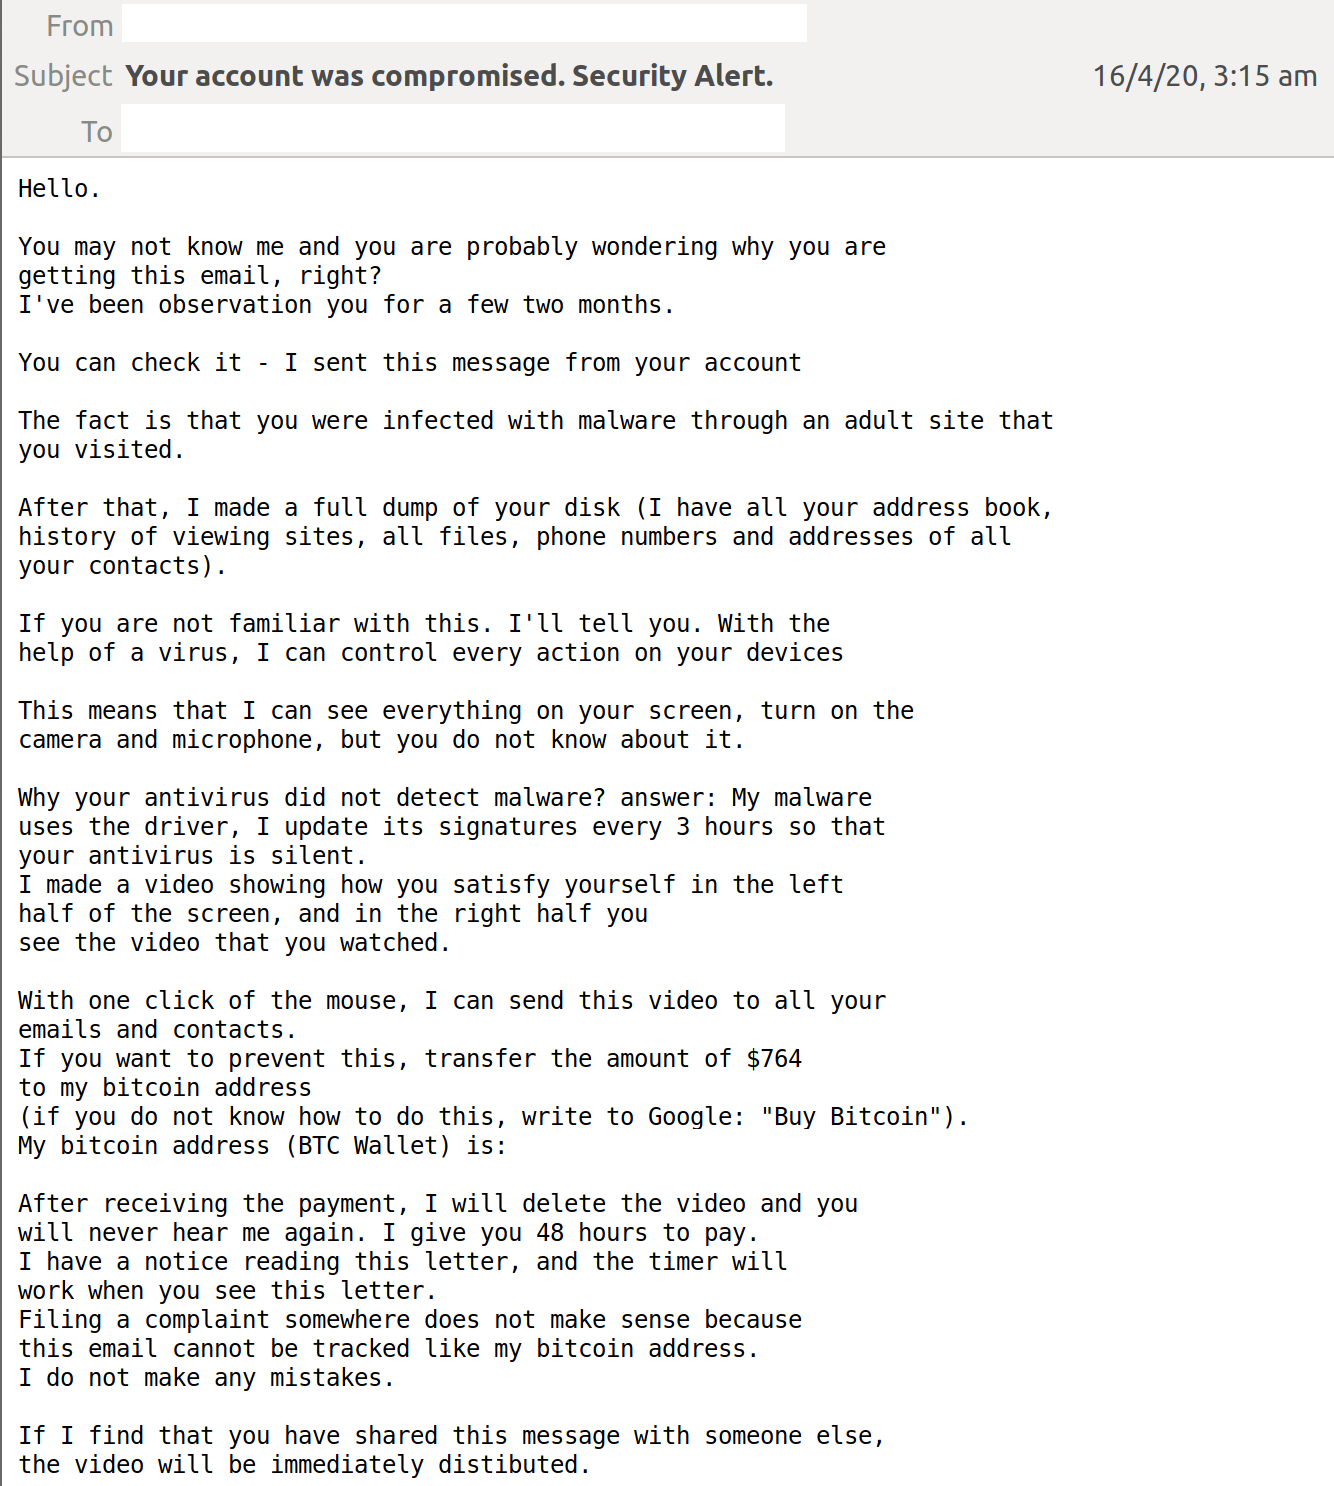 Warning: Multiple extortion phishing emails threatening to release data intercepted by MailGuard